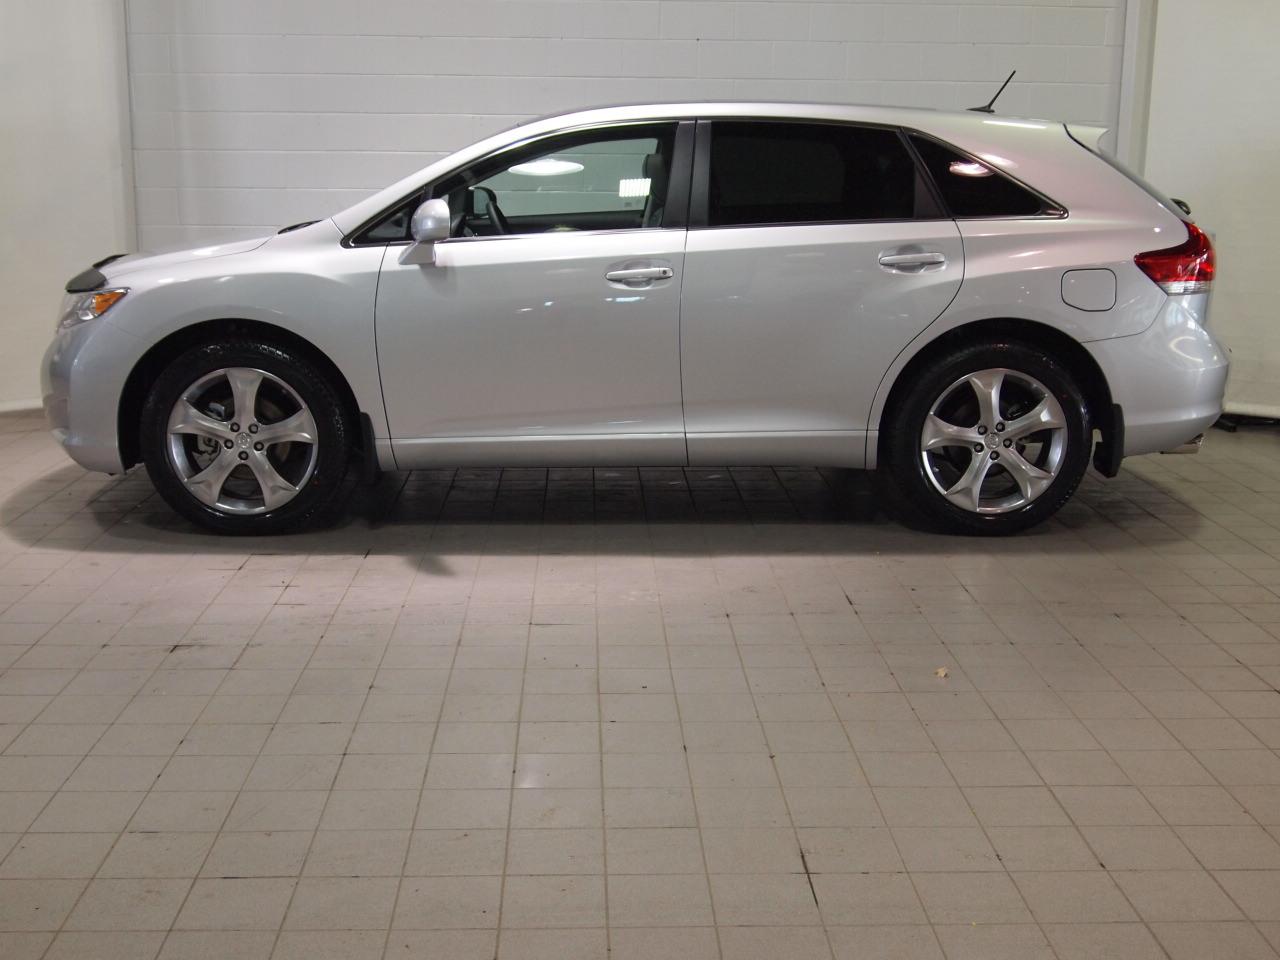 Toyota Venza 2011 White side view | Car Wallpapers